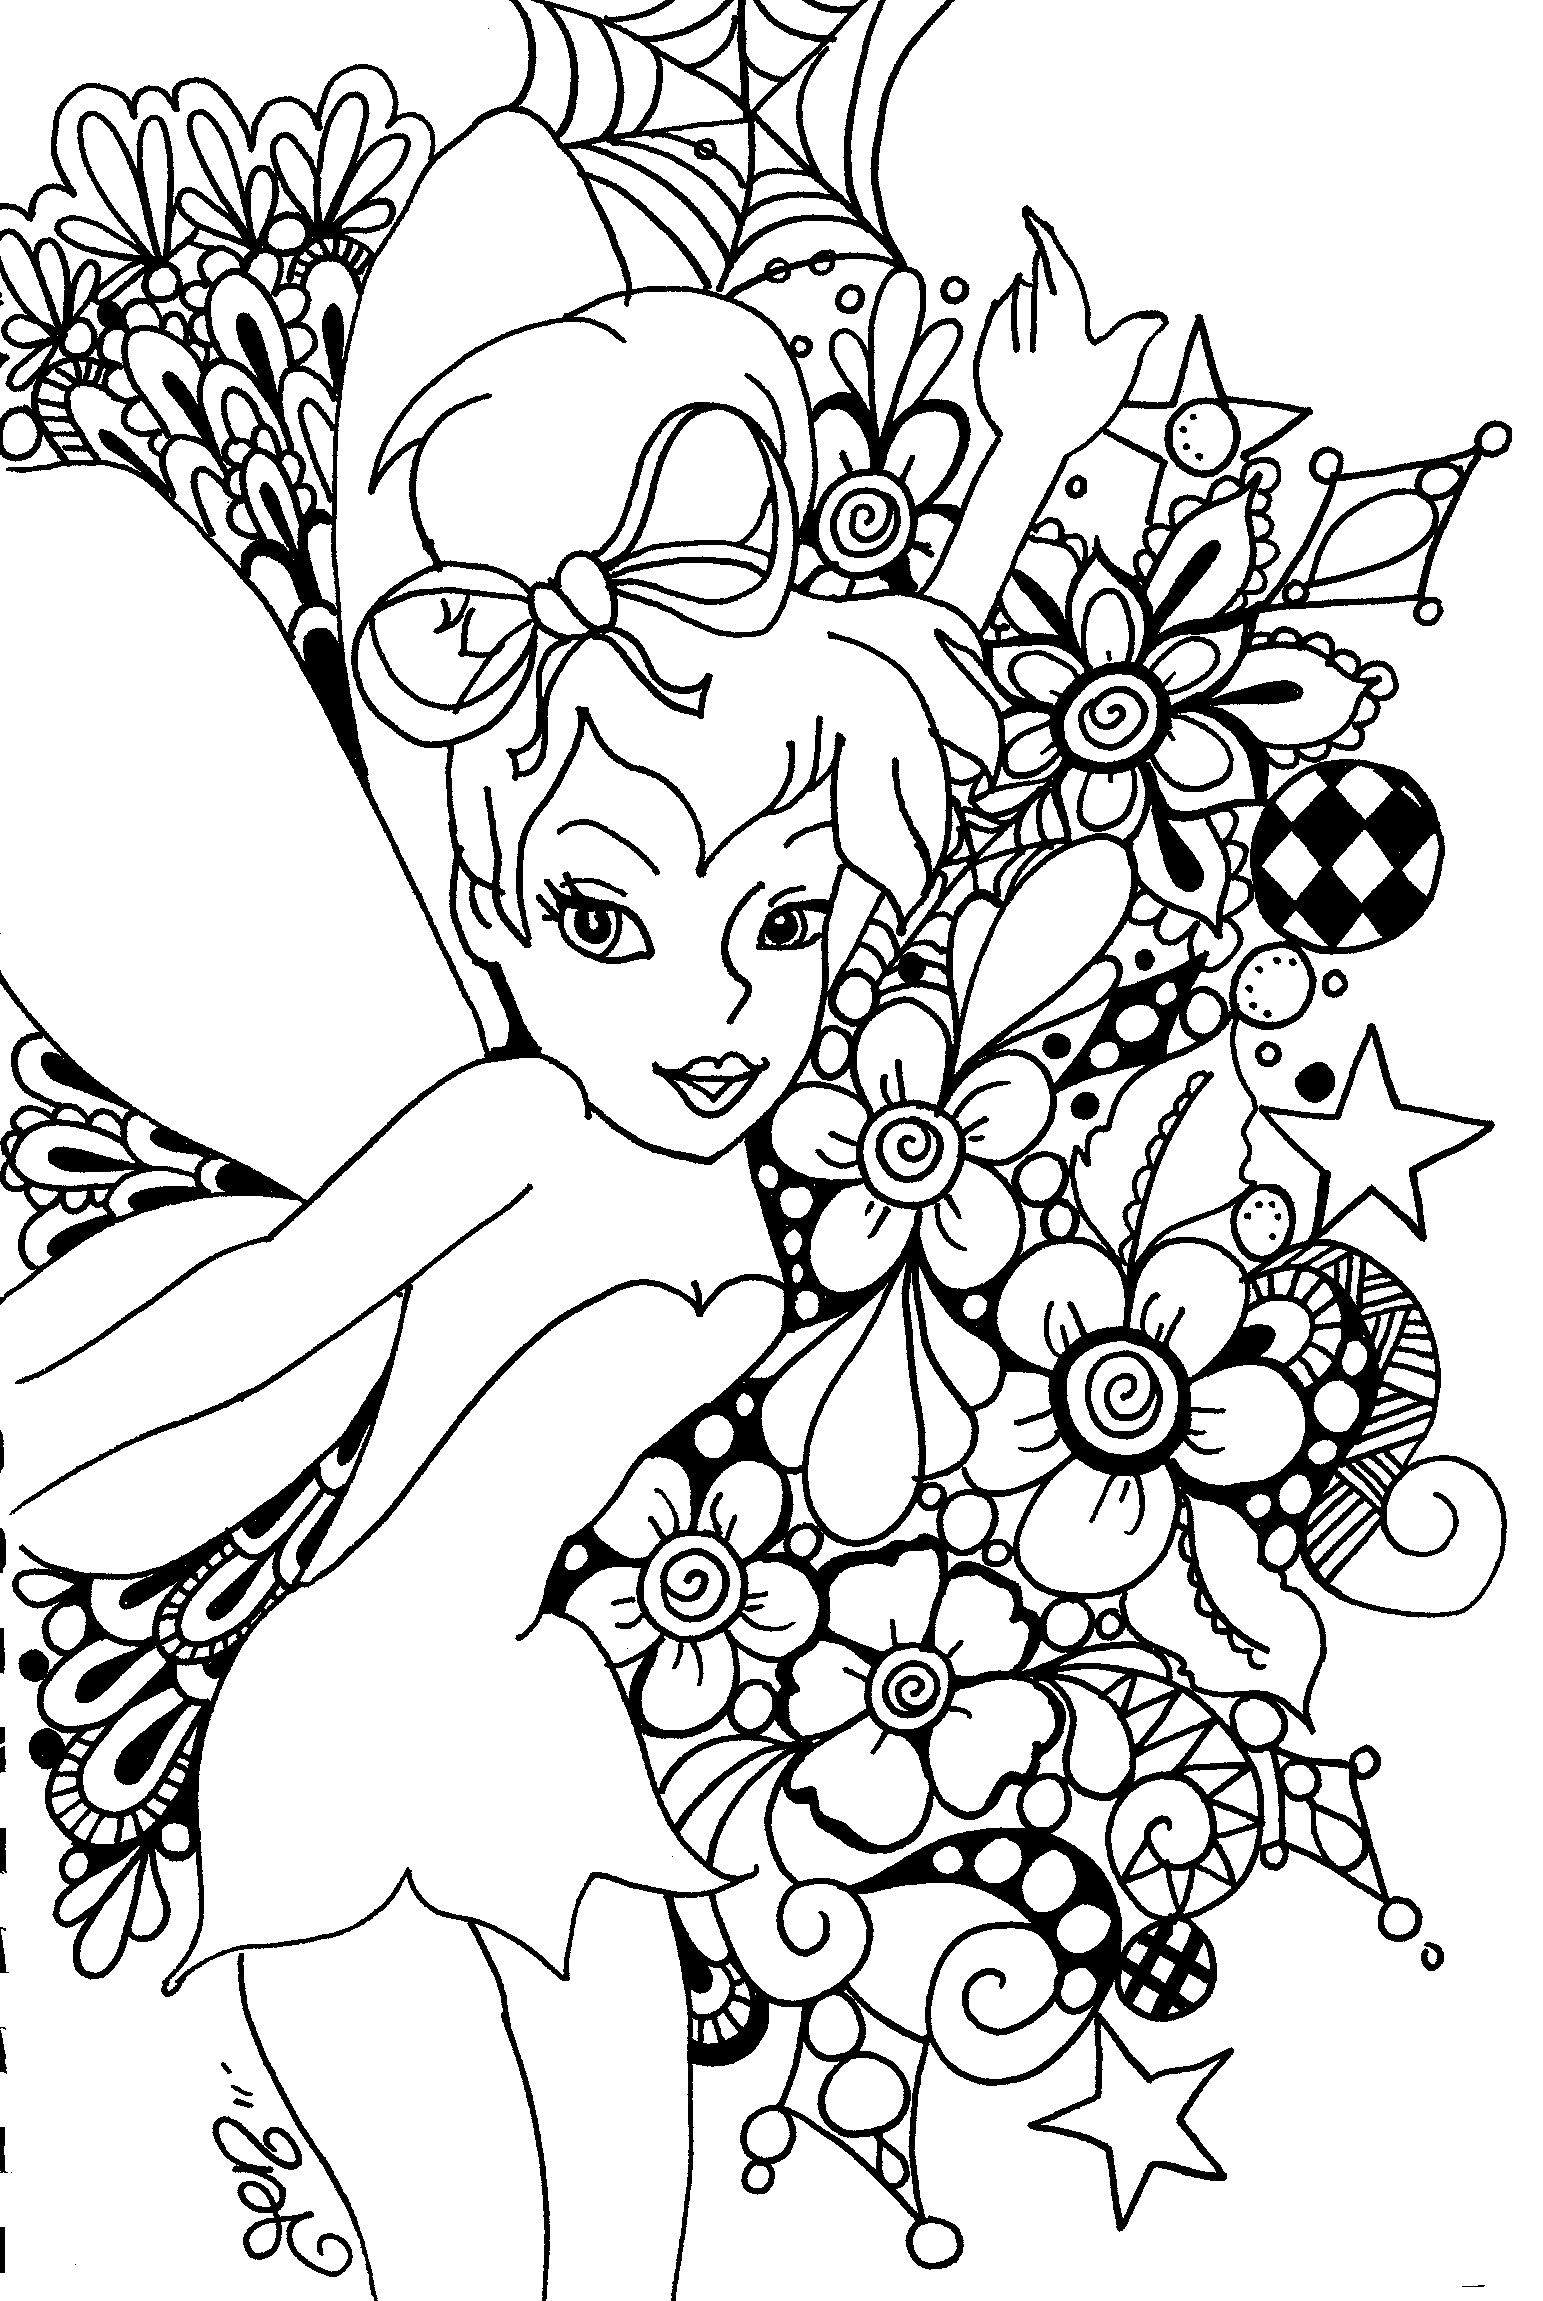 Free Printable Tinkerbell Coloring Pages For Kids | Art!! | Free - Tinkerbell Coloring Pages Printable Free